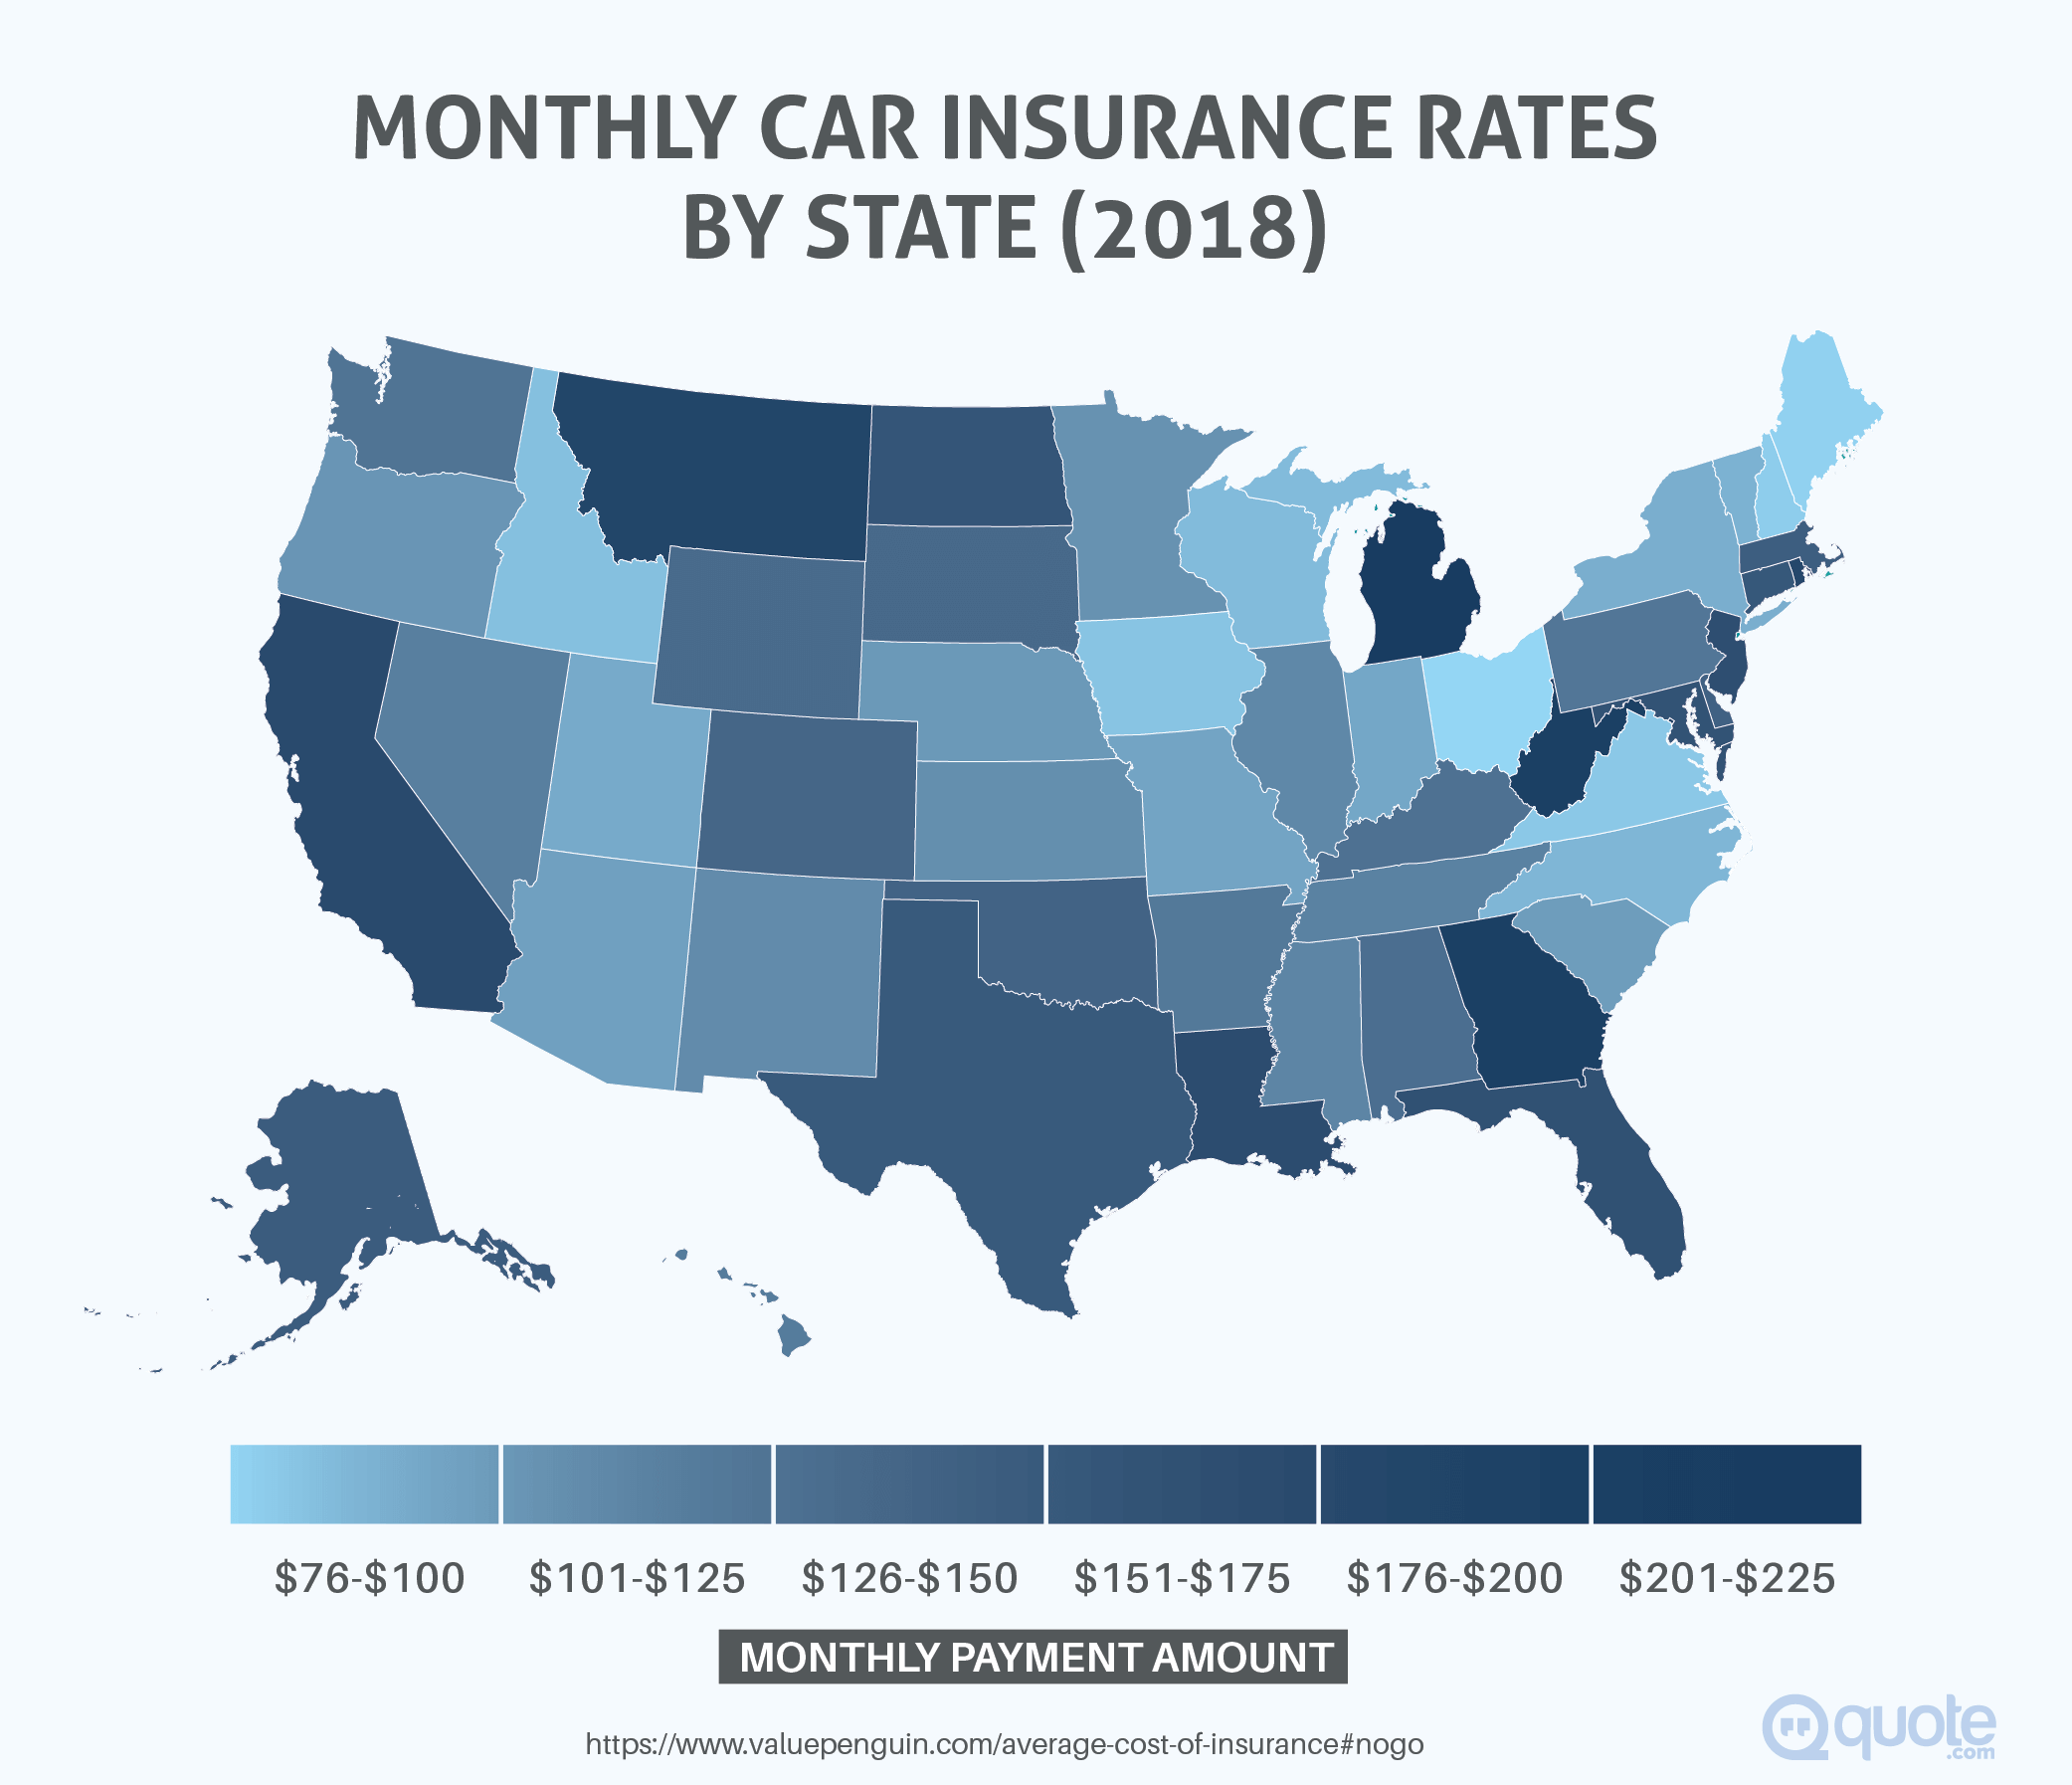 Monthly Car Insurance Rates by State in 2018